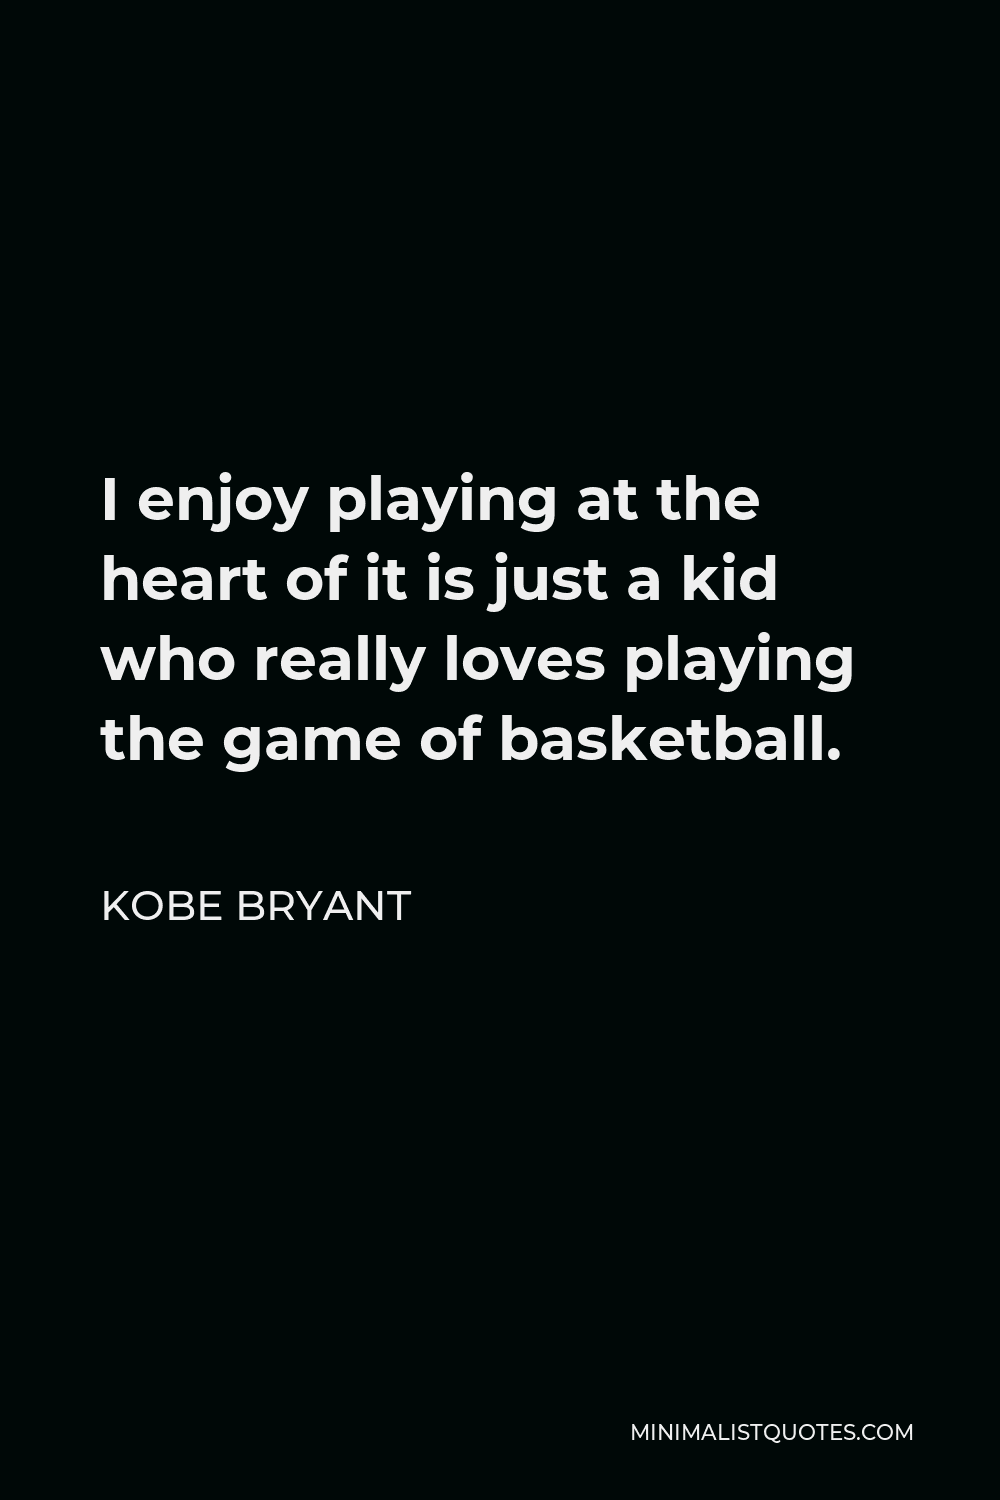 Kobe Bryant Quote - I enjoy playing at the heart of it is just a kid who really loves playing the game of basketball.